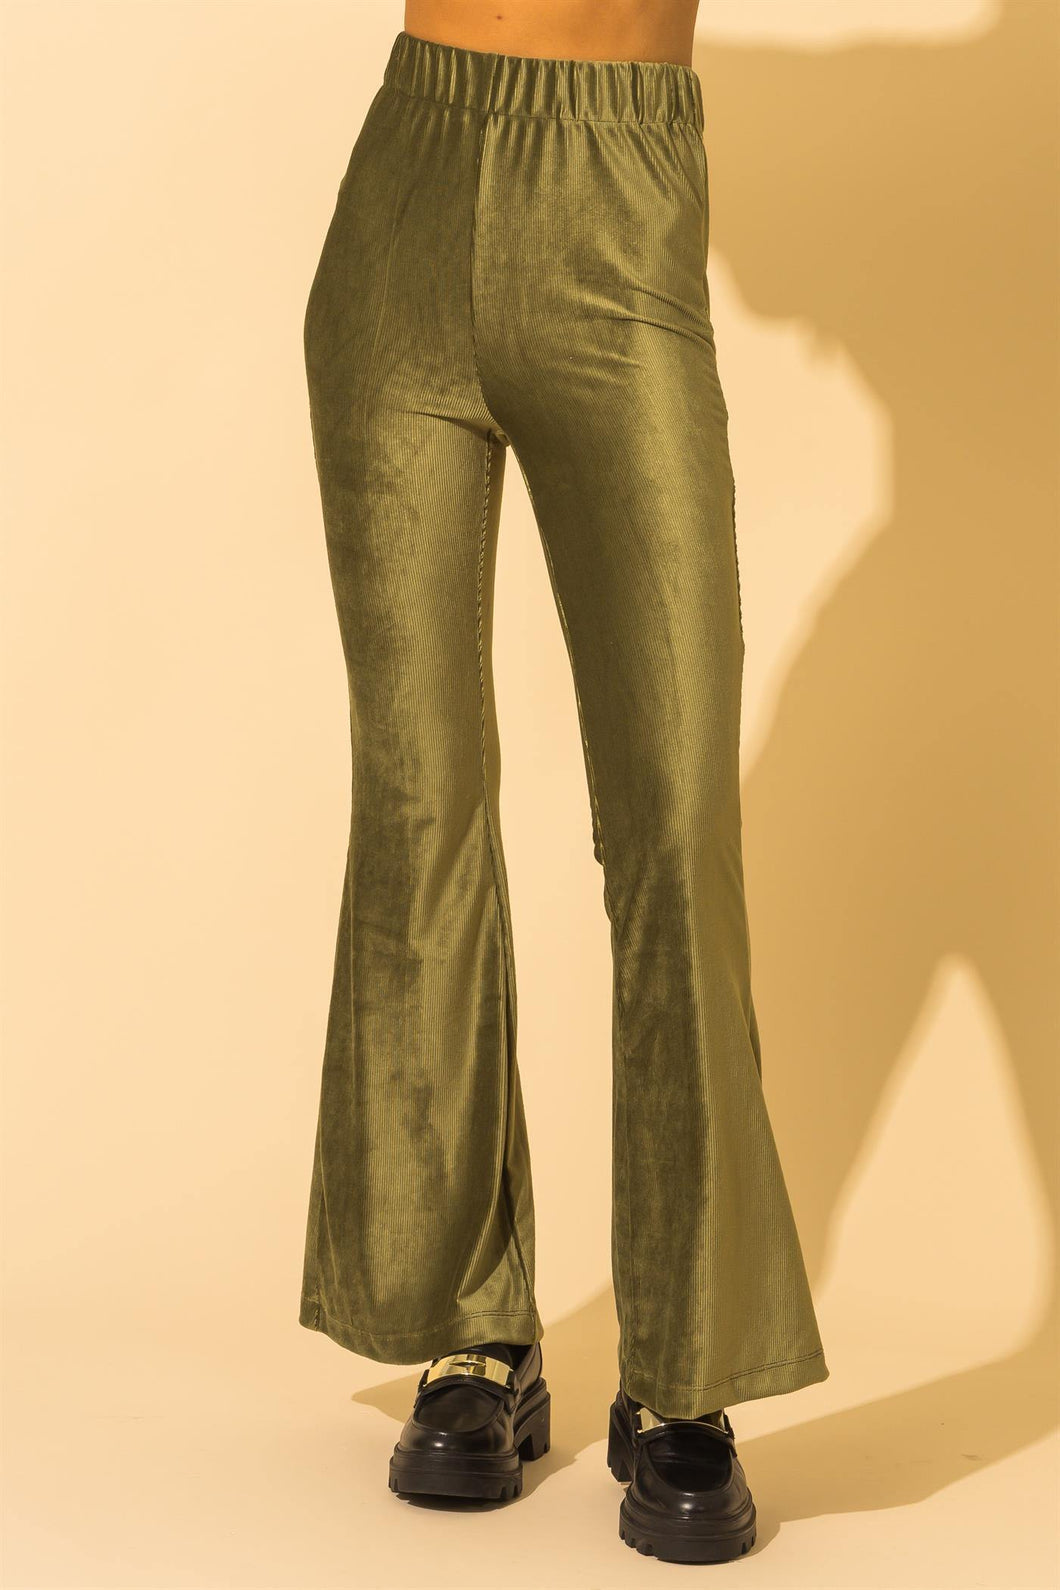 Star Of The Show Pants Olive